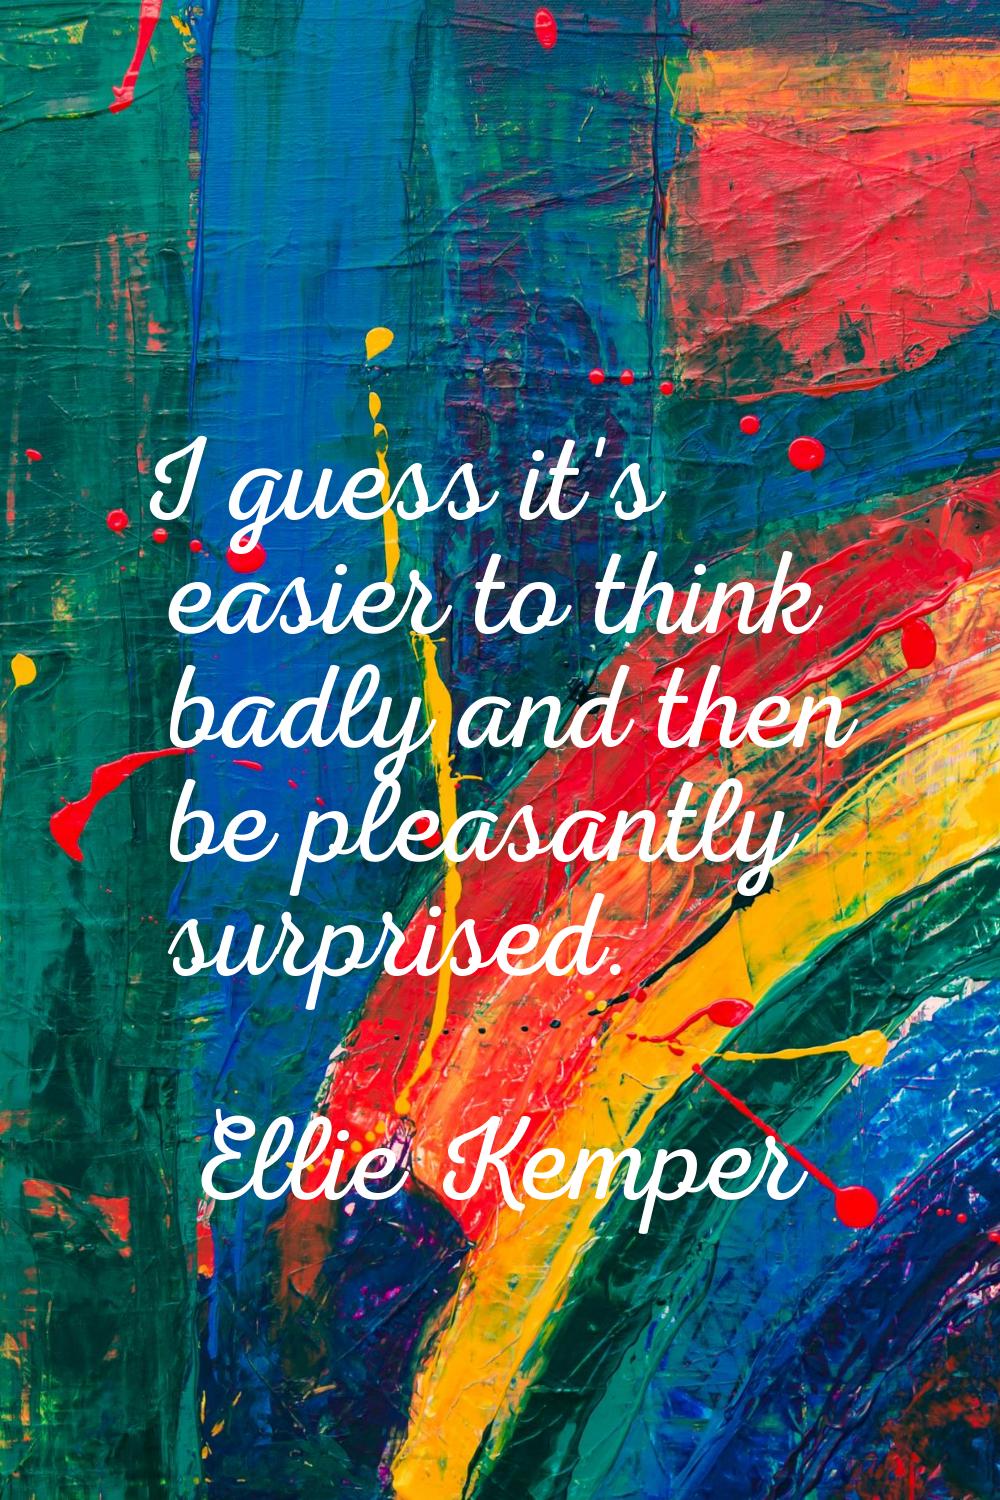 I guess it's easier to think badly and then be pleasantly surprised.